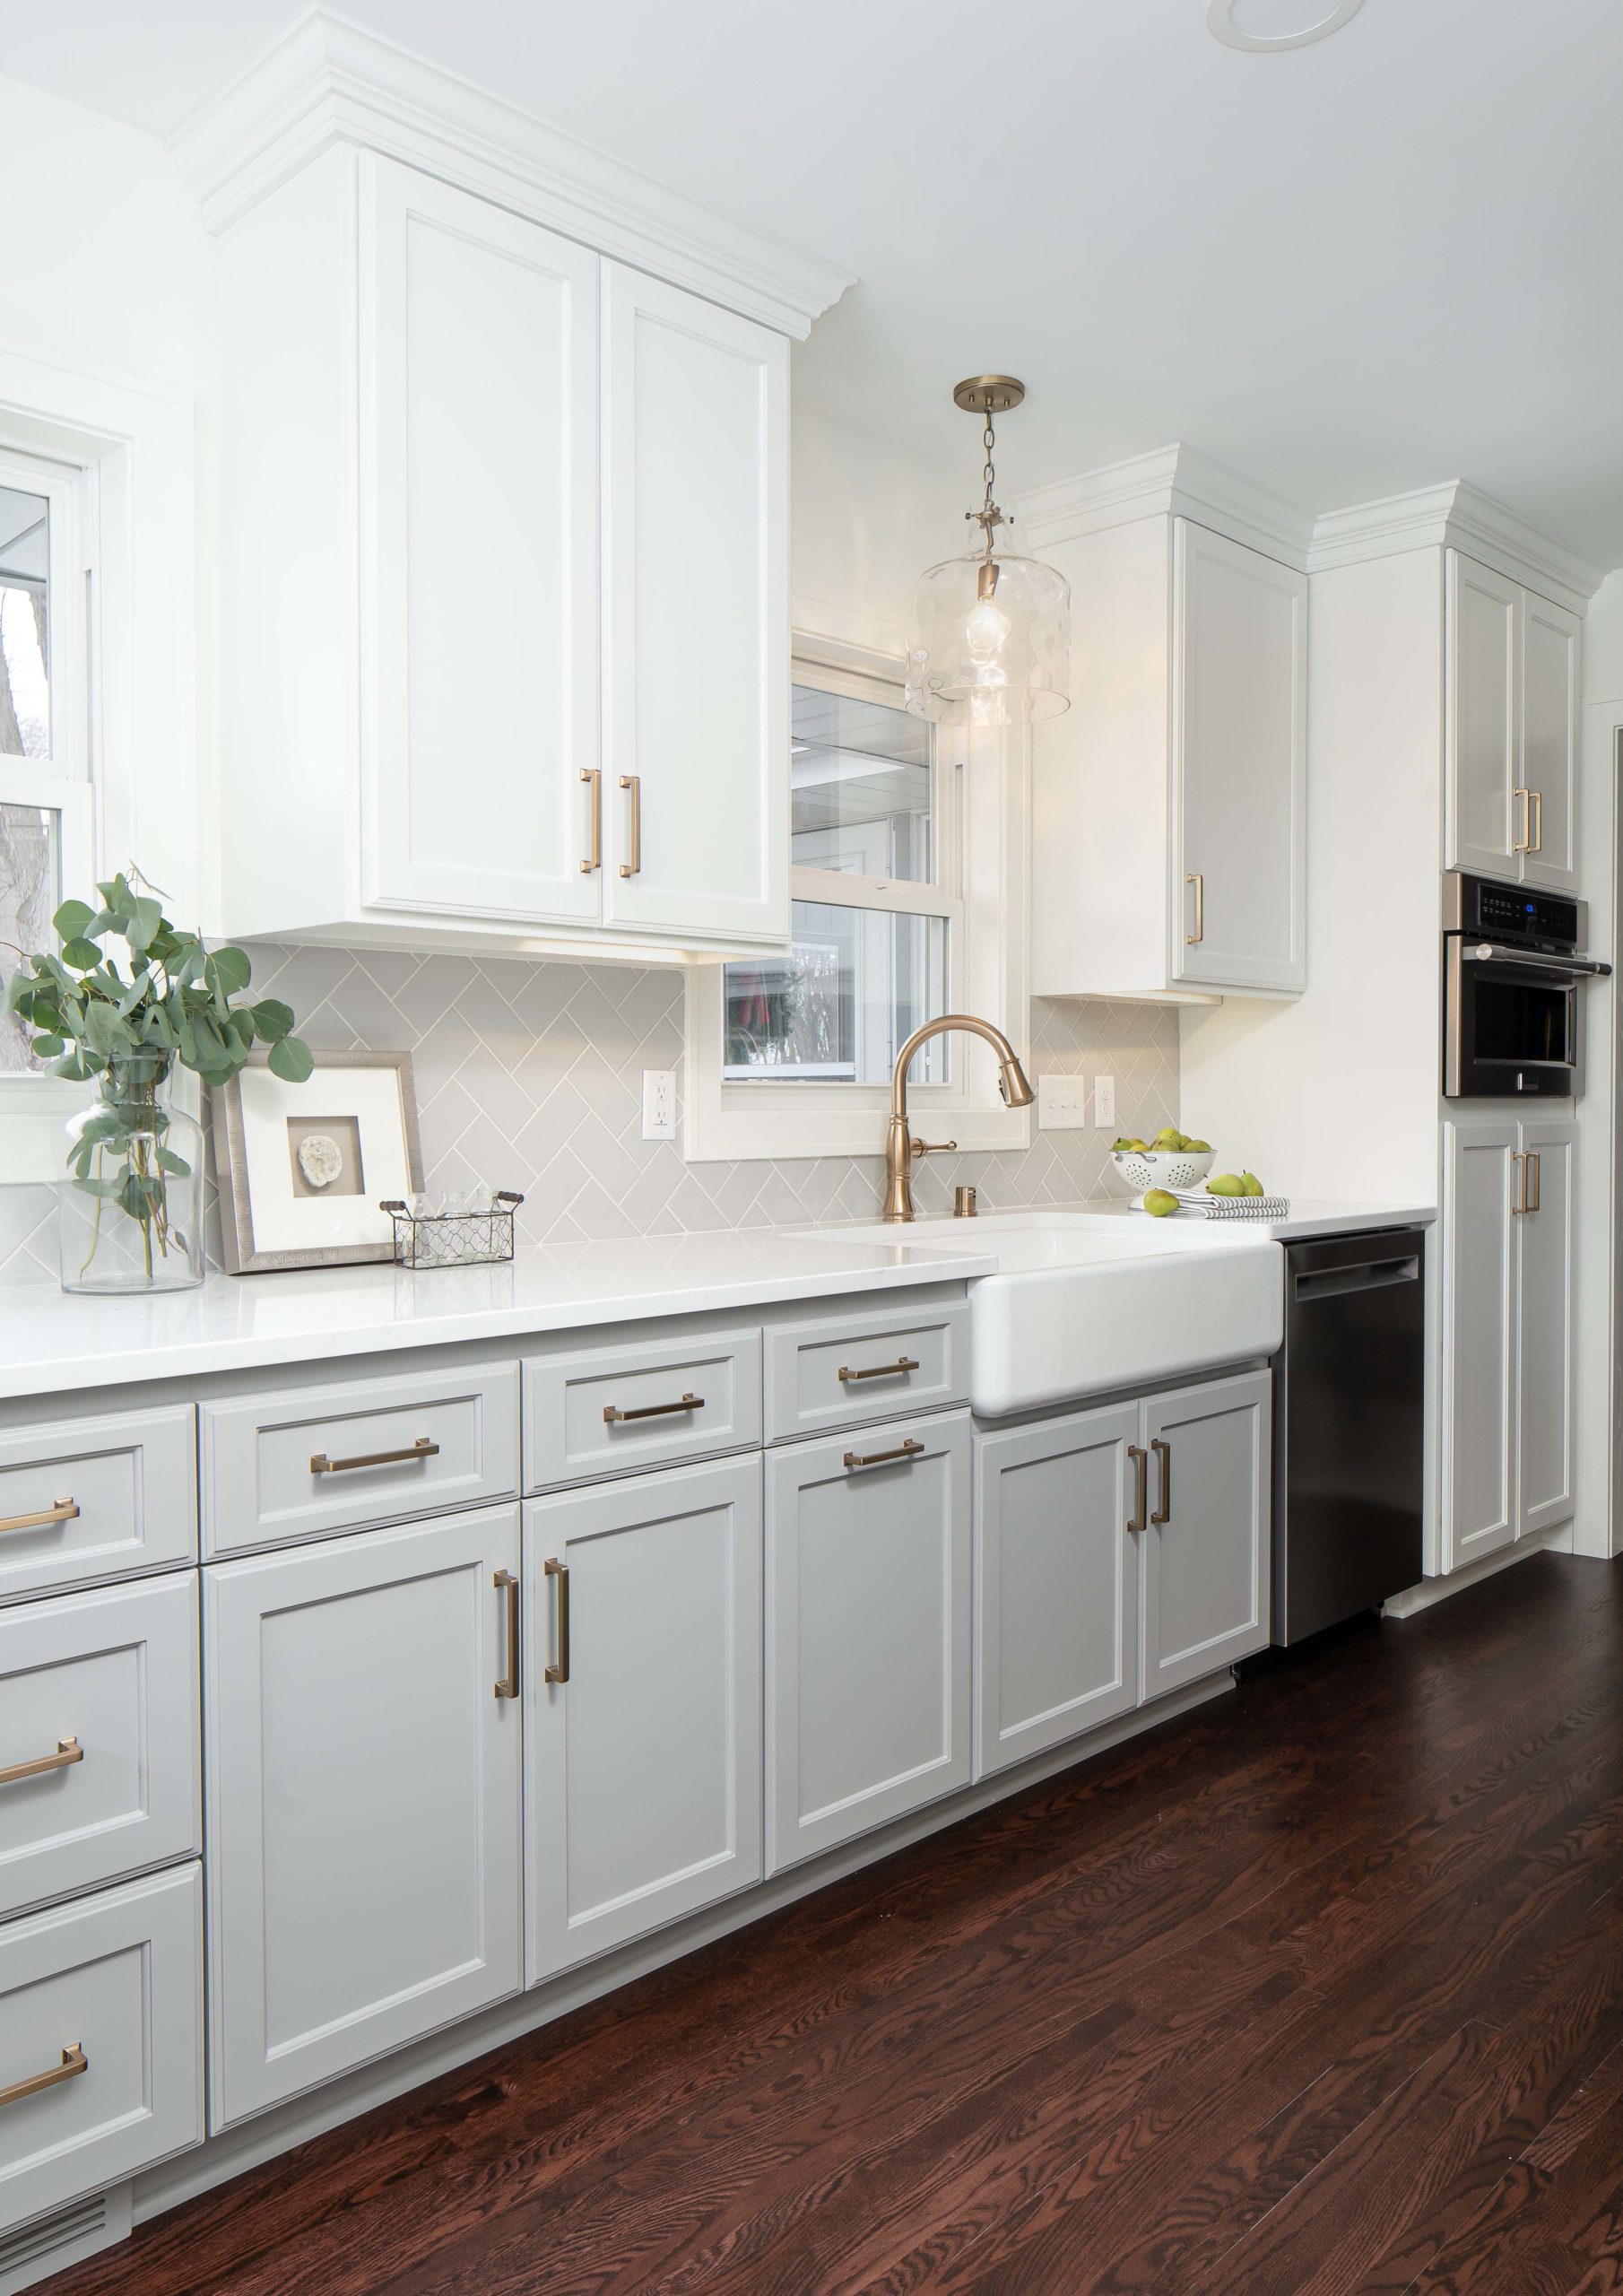 A kitchen renovation with white cabinets and hardwood floors.